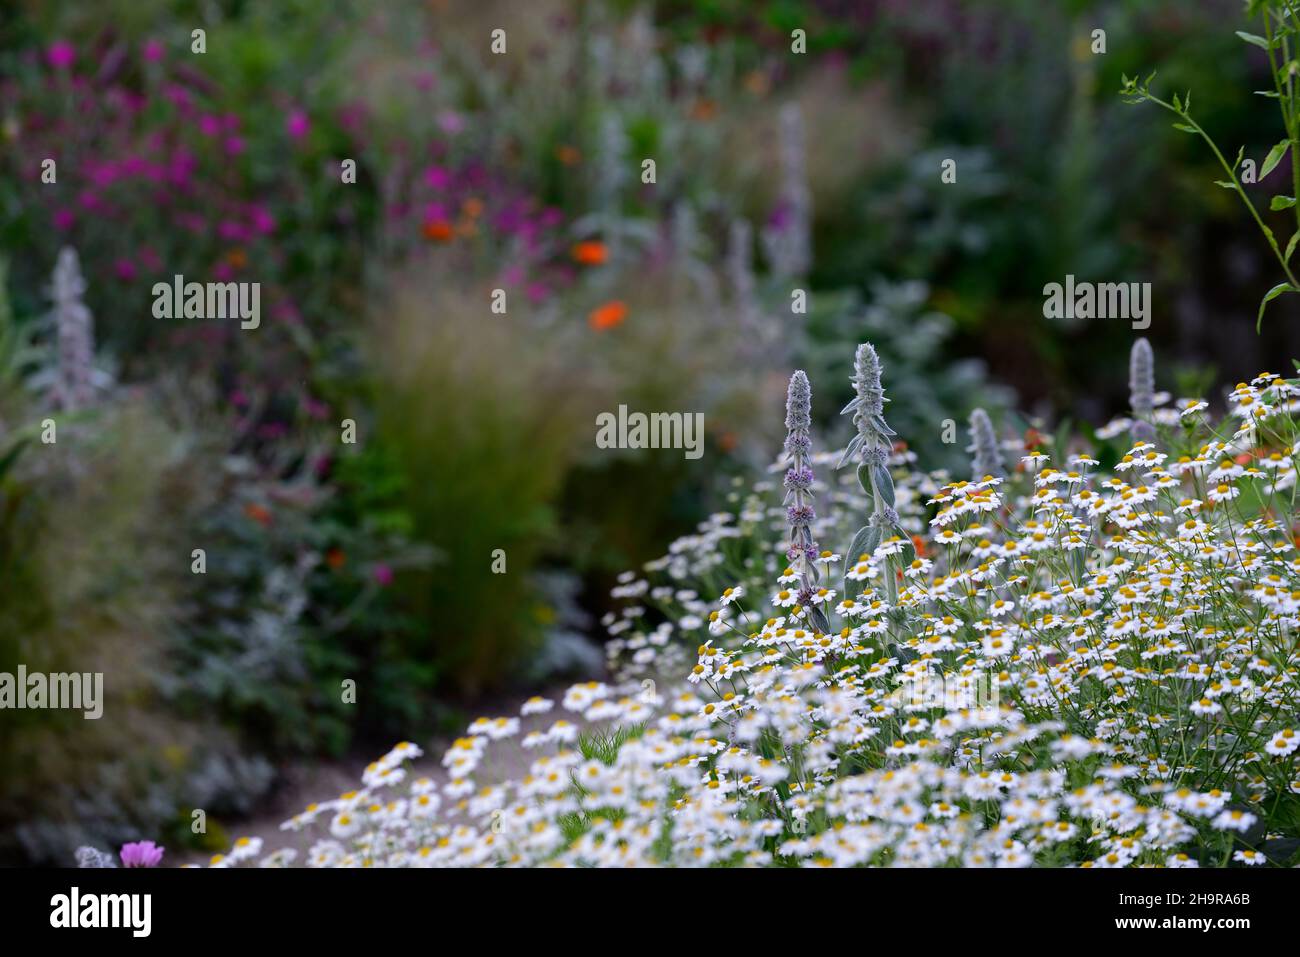 Stachys byzantina,lamb's-ear,woolly hedgenettle,silver foliage,silver leaves,Tanacetum parthenium,mound,layer,layers,layered planting,RM Floral Stock Photo